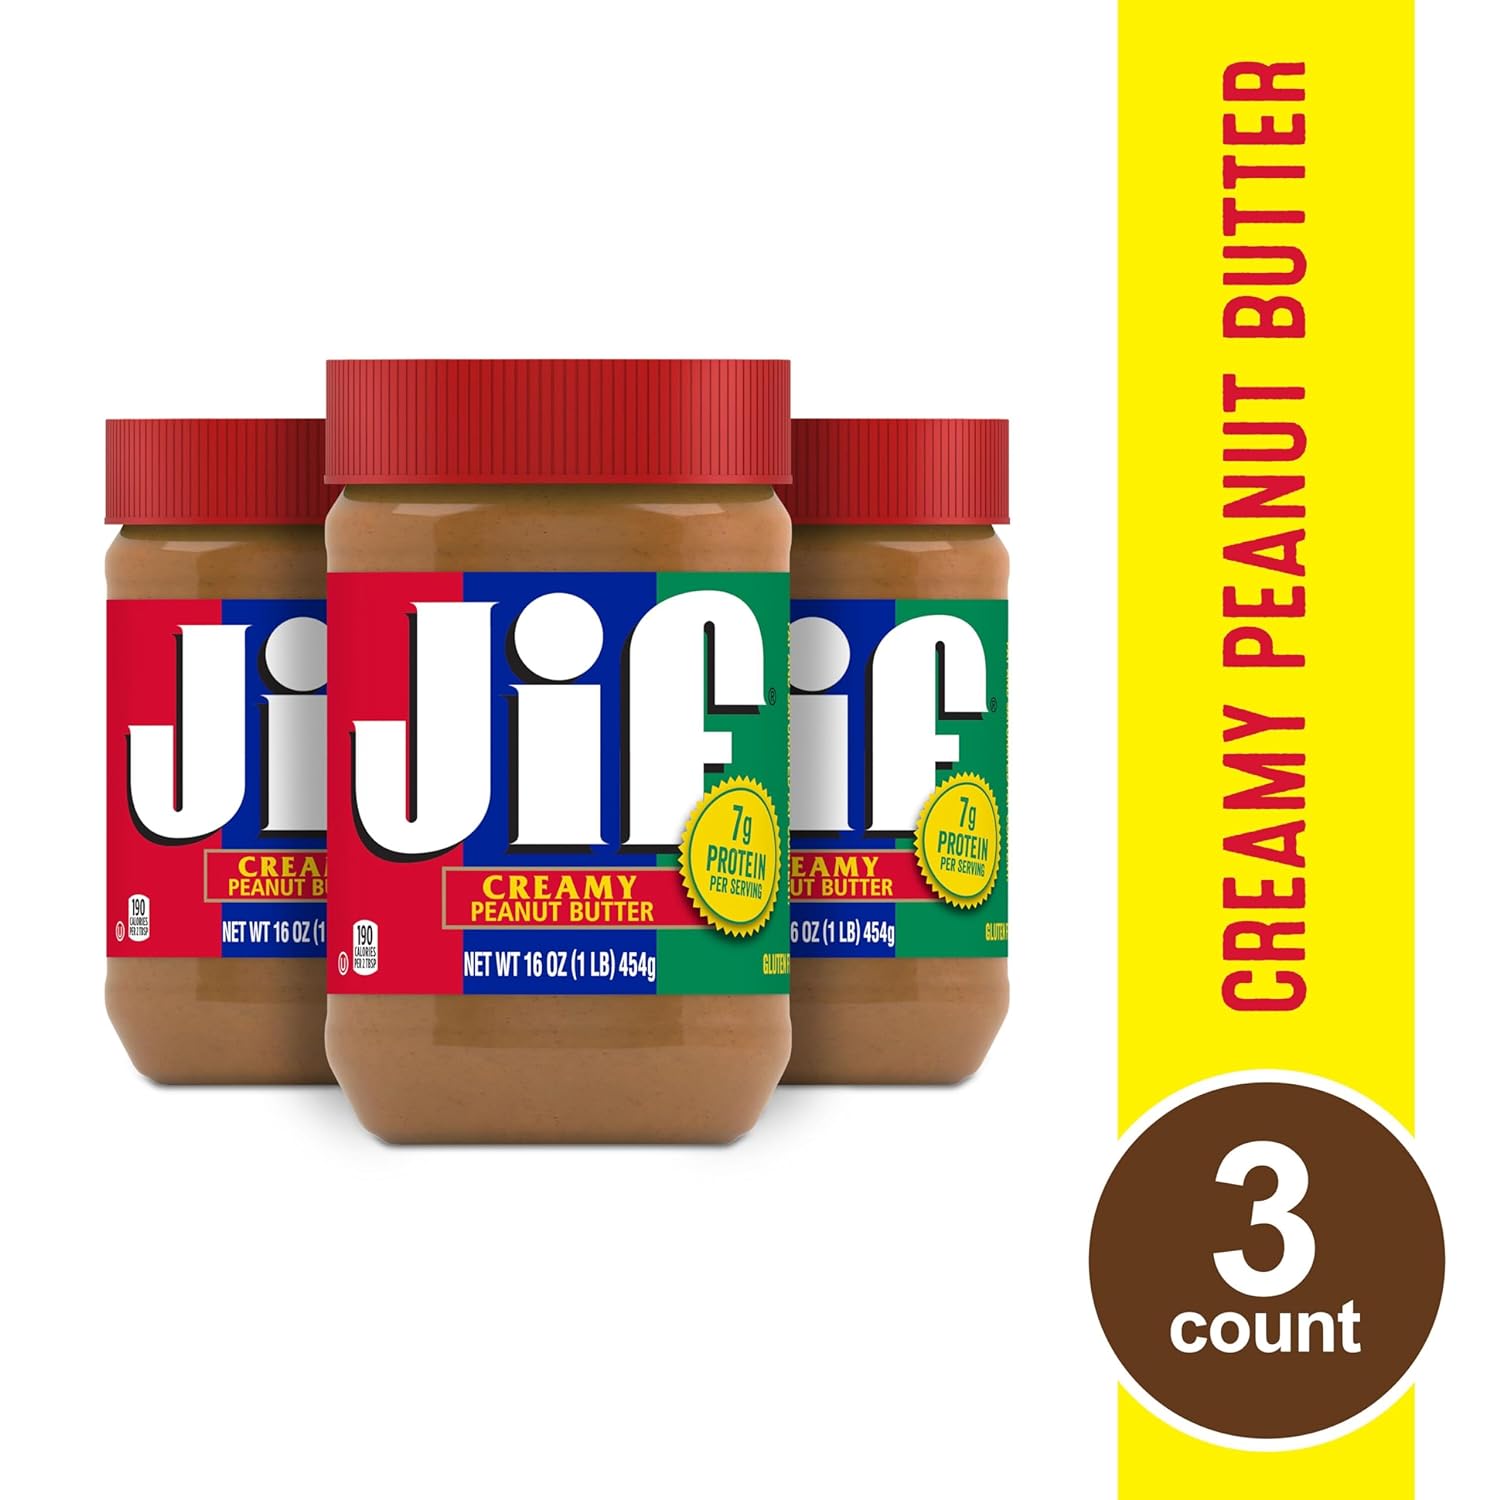 [S&S] $6.55: 3-Pack 16-Oz Jif Peanut Butter (Creamy) at Amazon